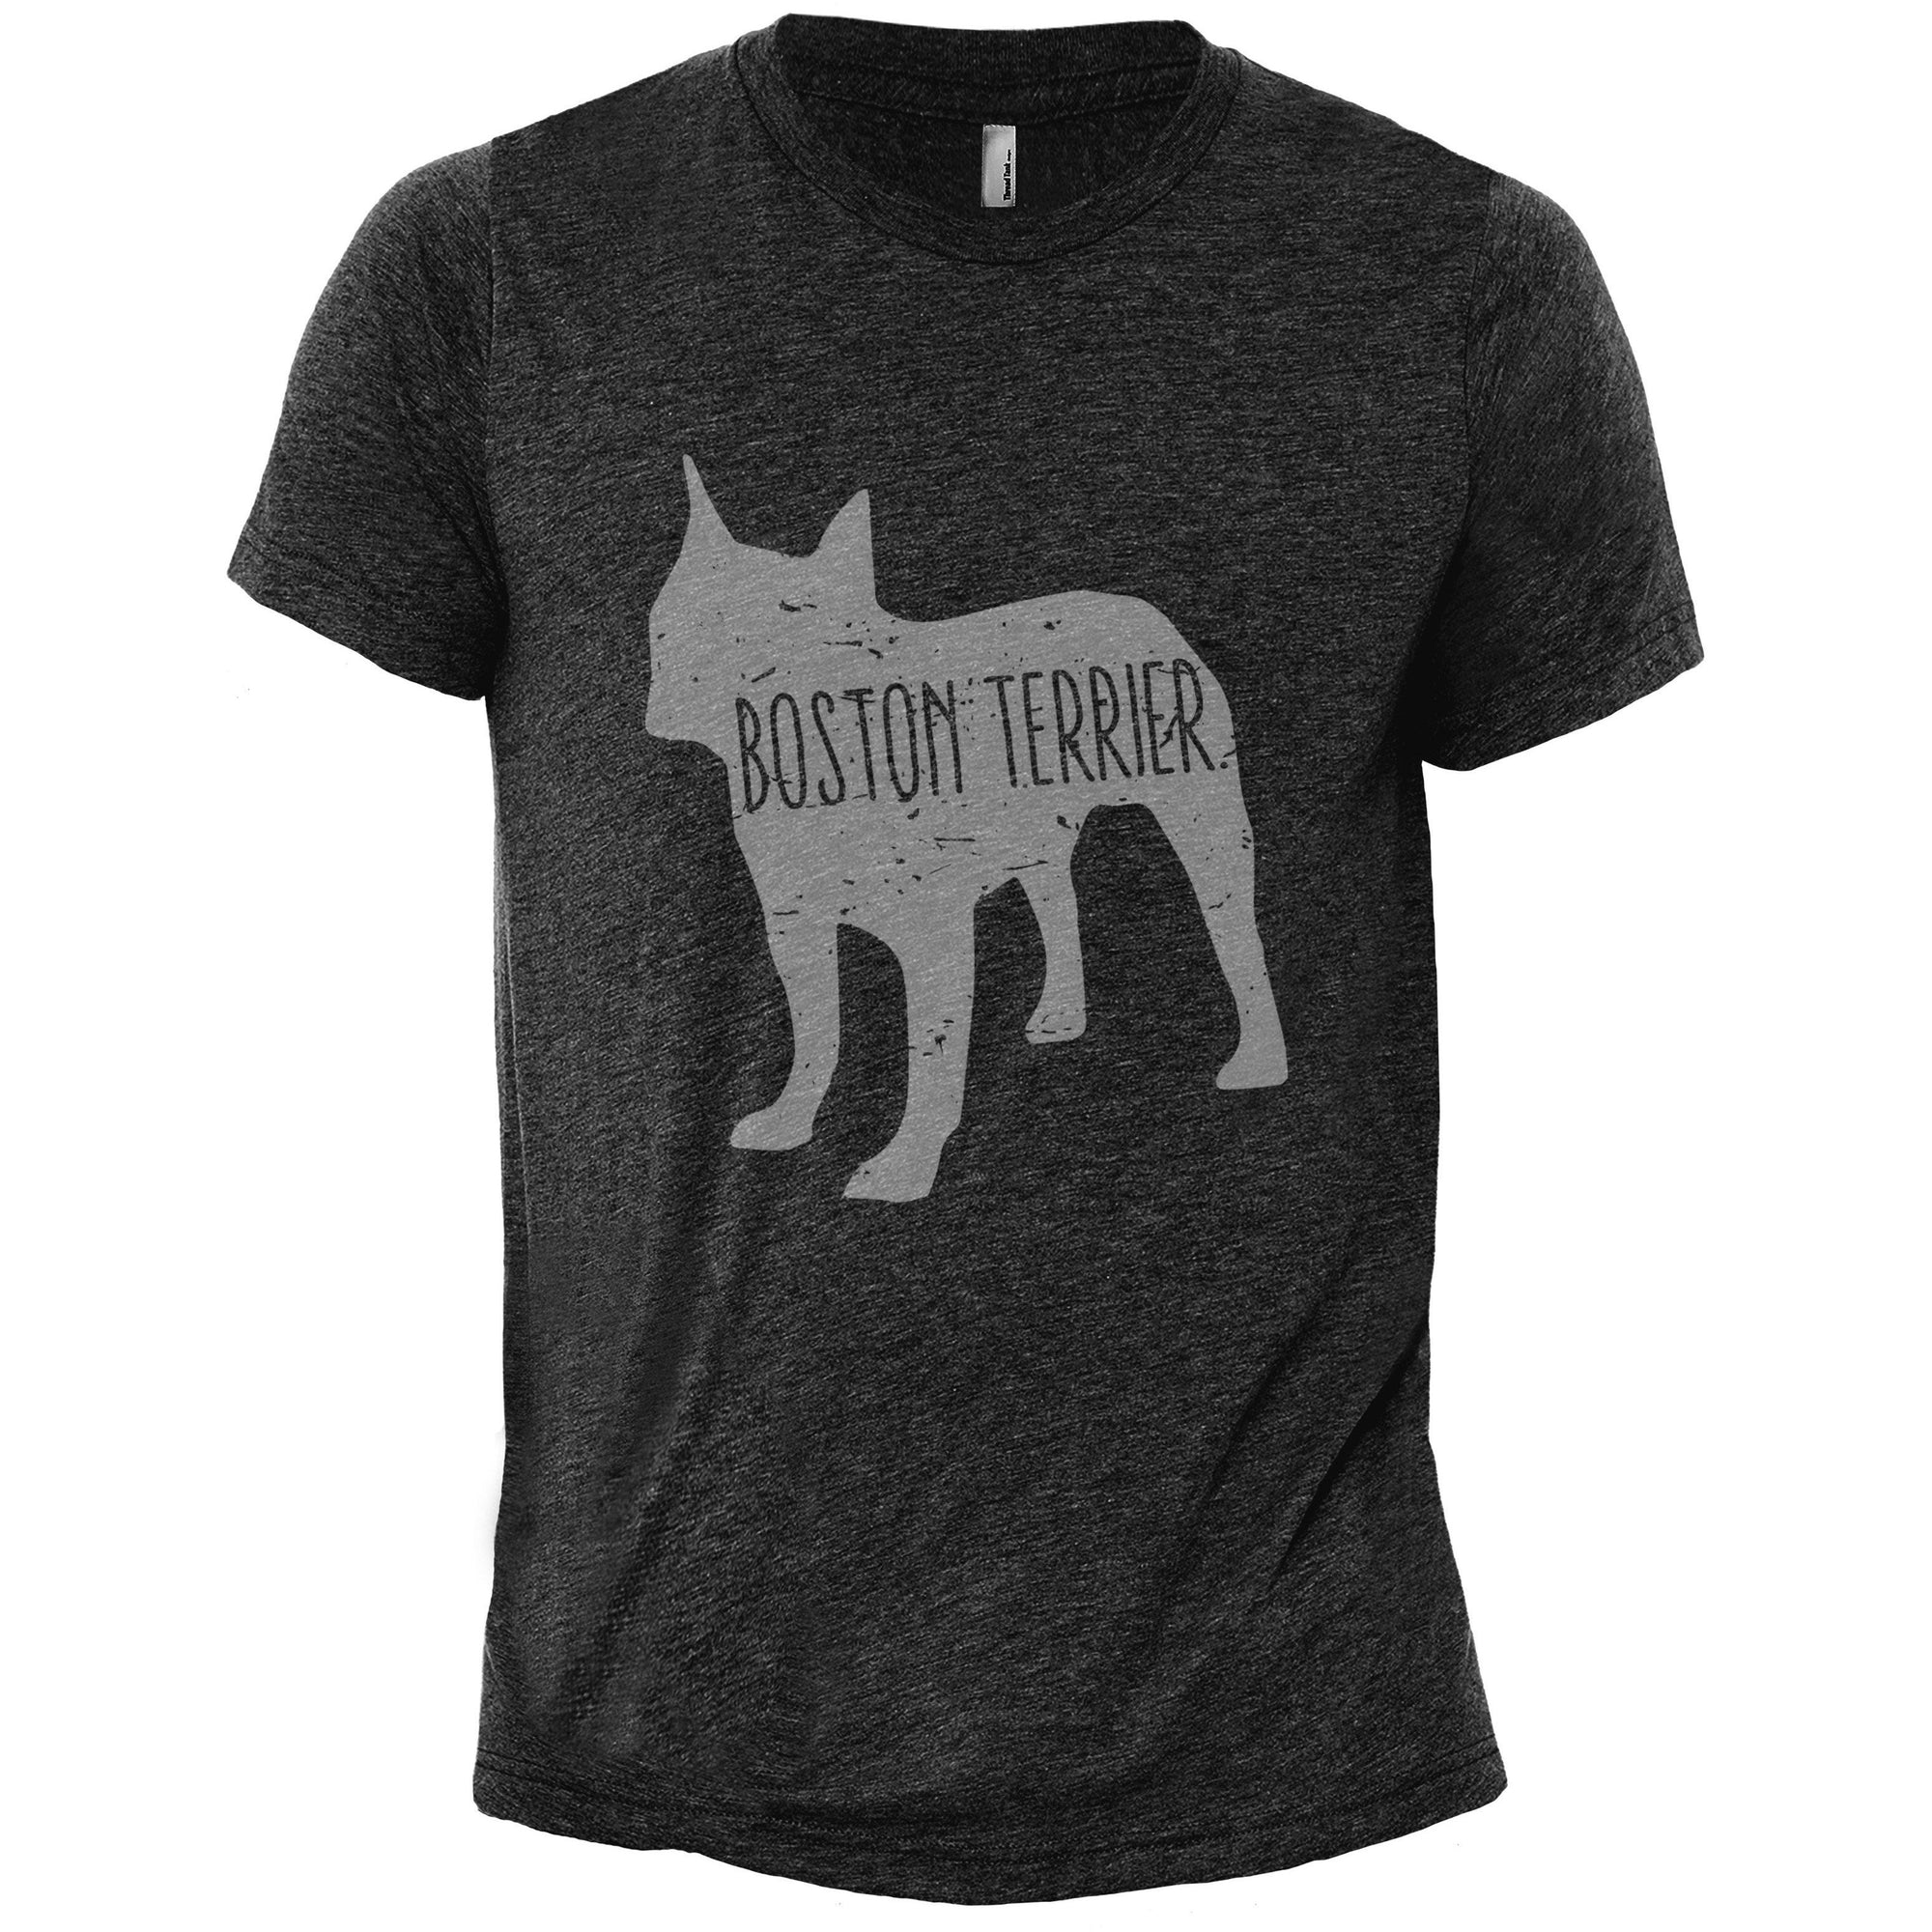 Boston Terrier Dog Silhouette Charcoal Printed Graphic Men's Crew T-Shirt Tee